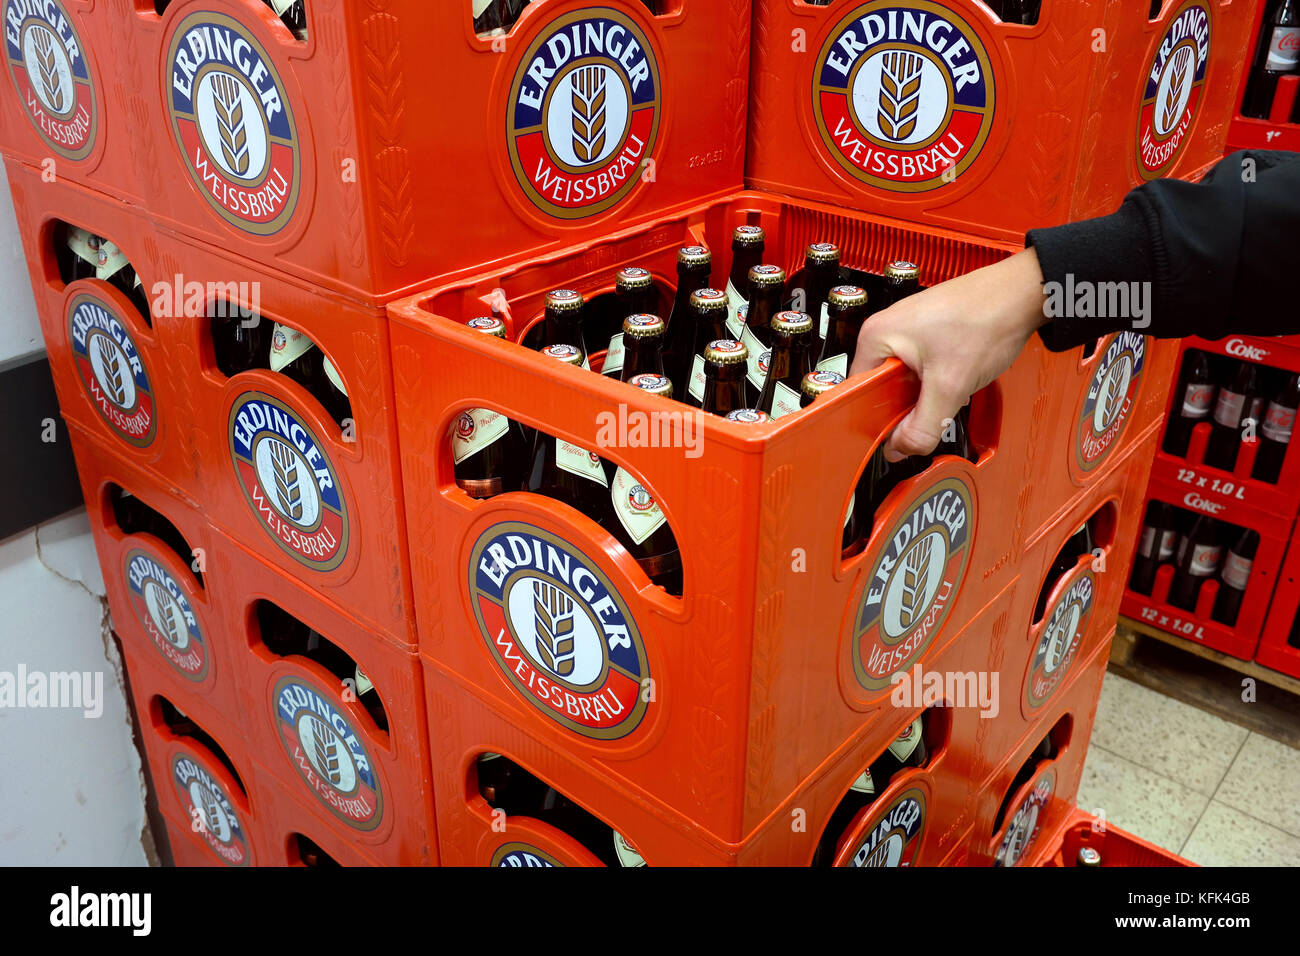 Erdinger beer crates are piled up in a supermarket in Aachen Stock Photo